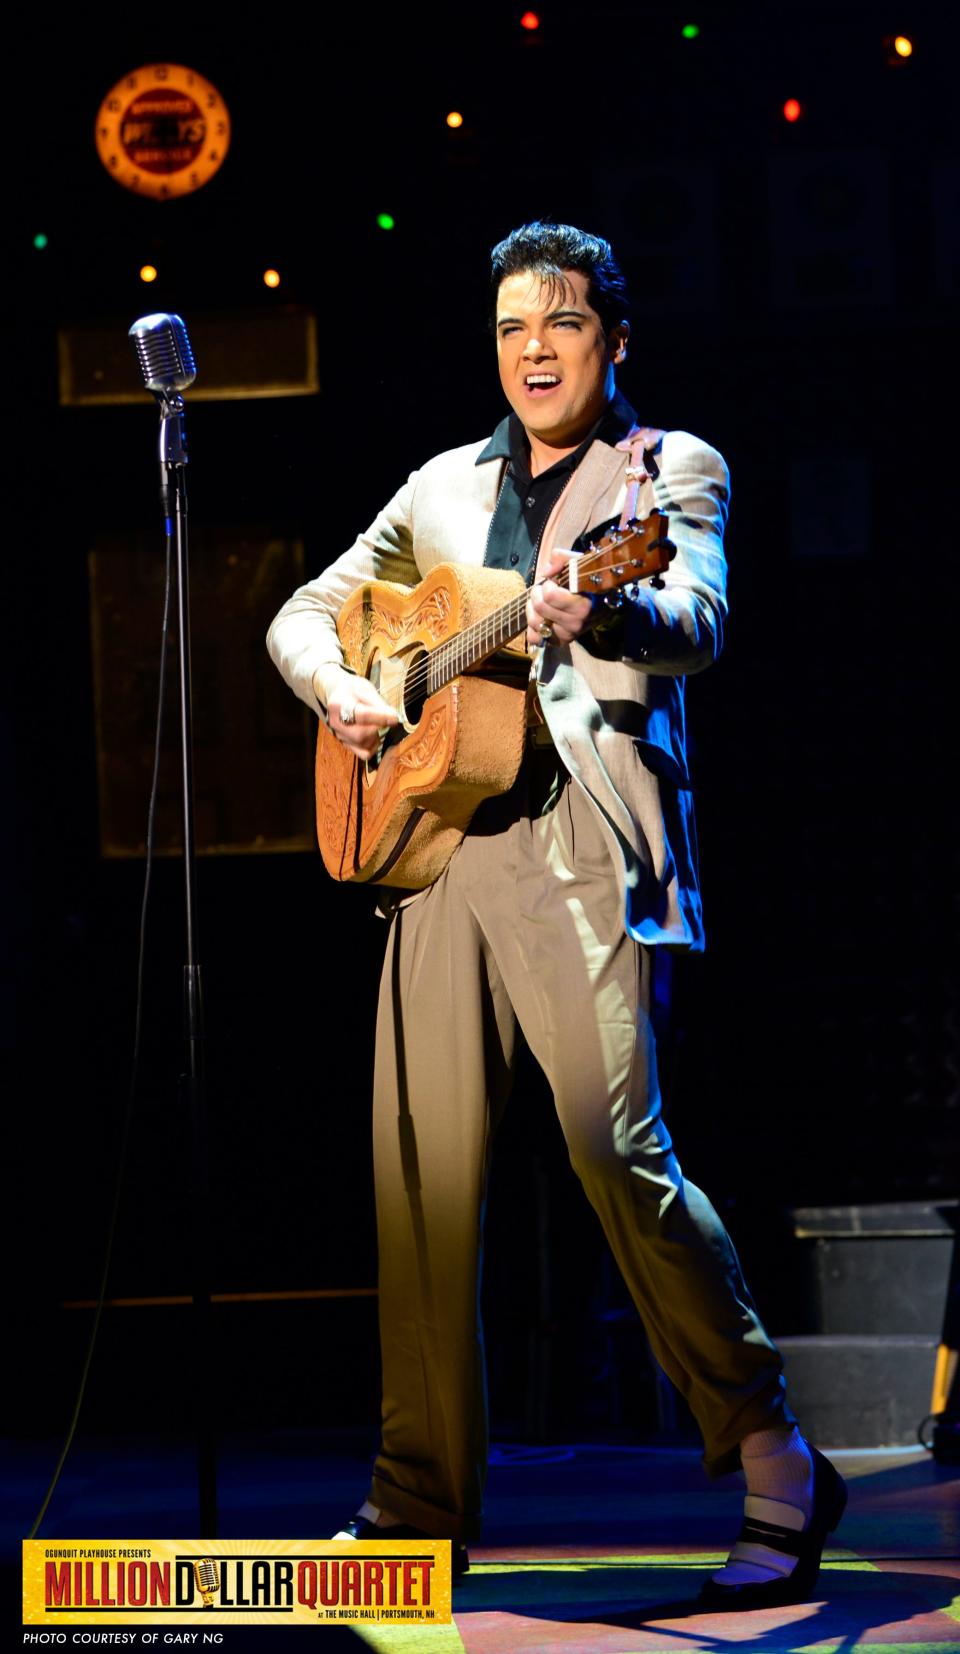 Daniel Durston brings down the house as Elvis Presley in Million Dollar Quartet, playing at The Music Hall in Portsmouth through April 9.